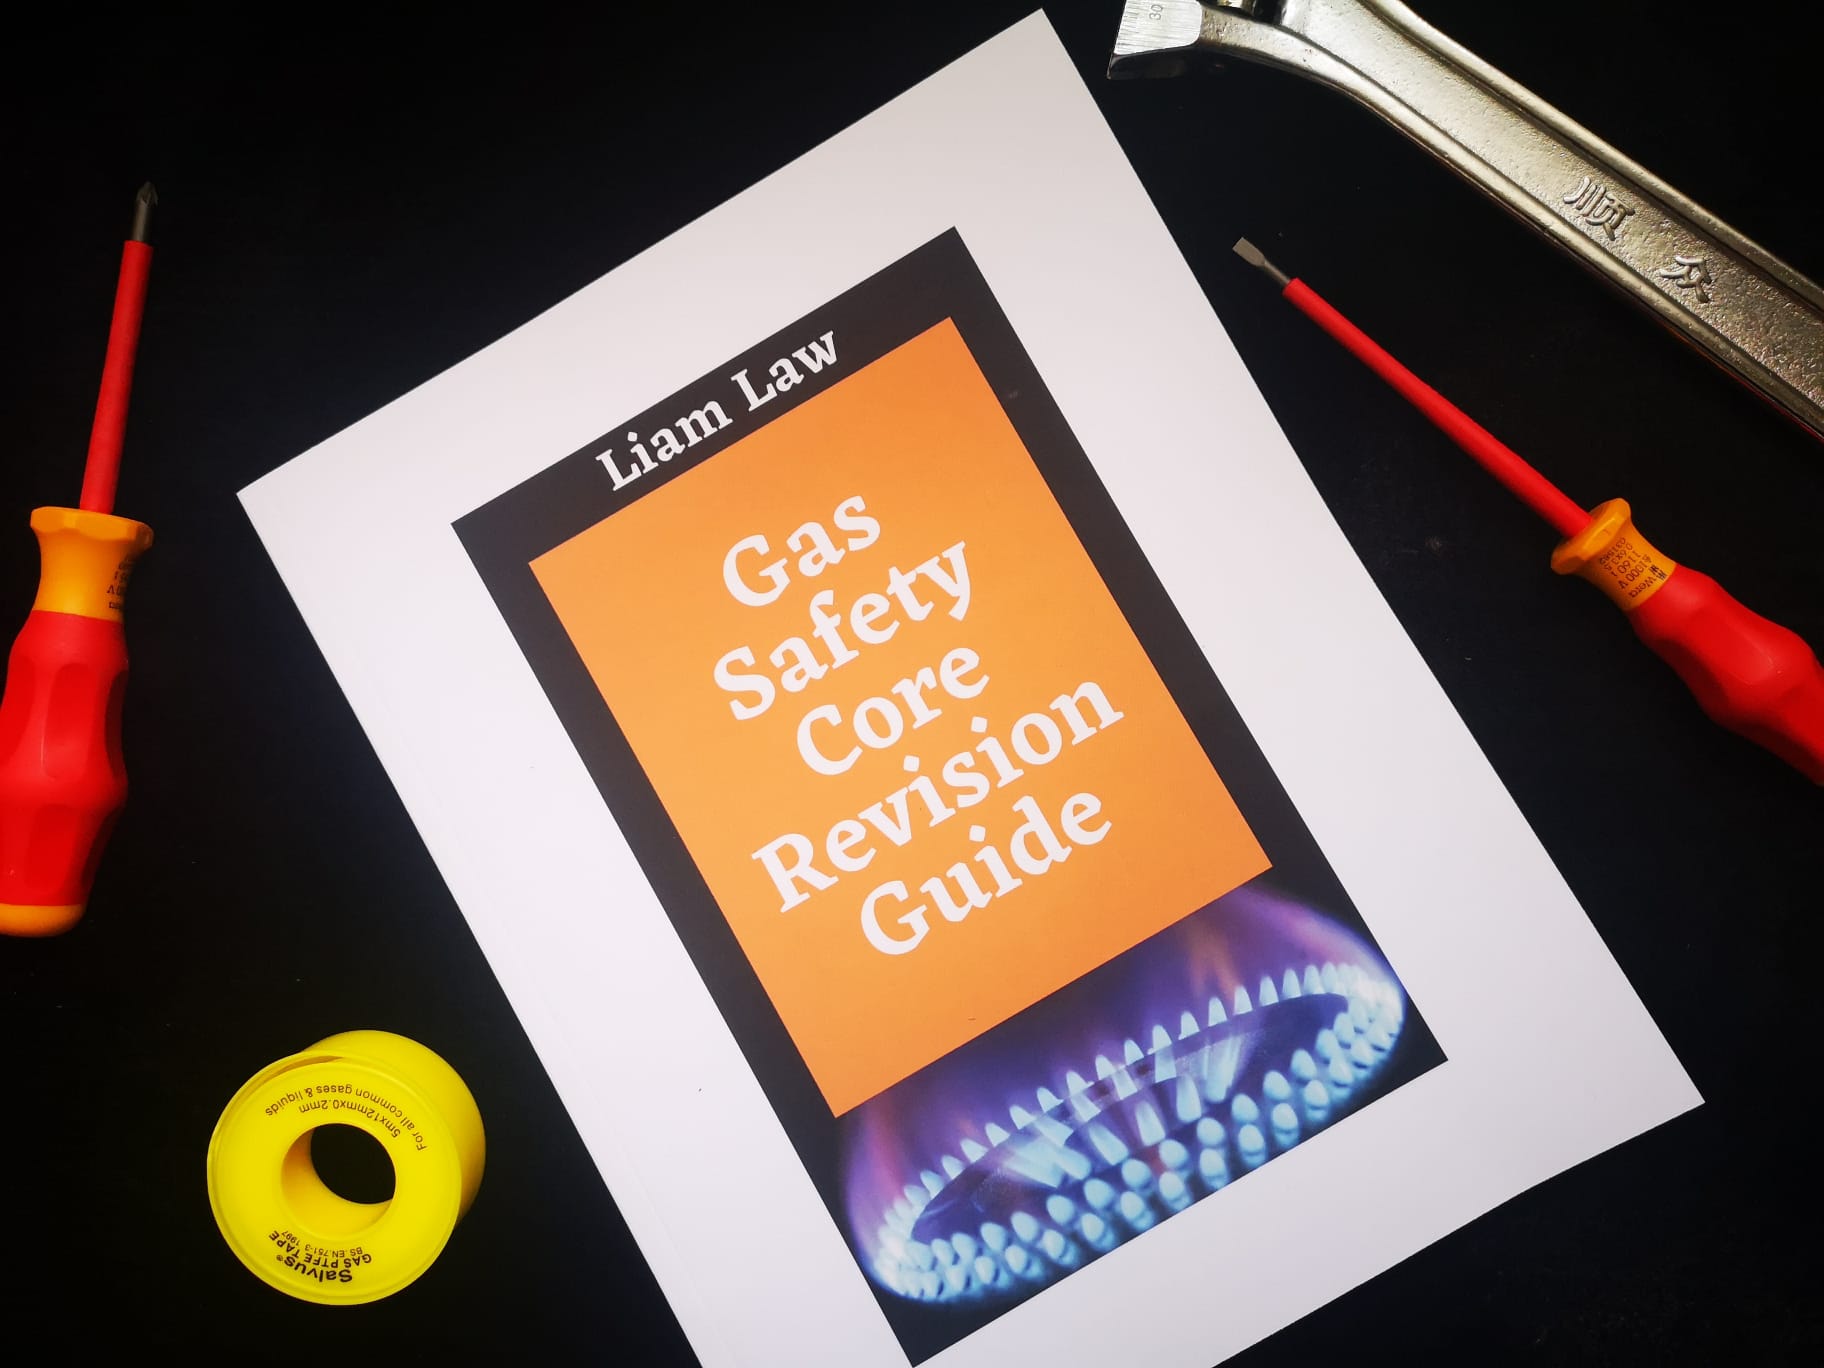 image of gas safety core revision guide book from Amazon